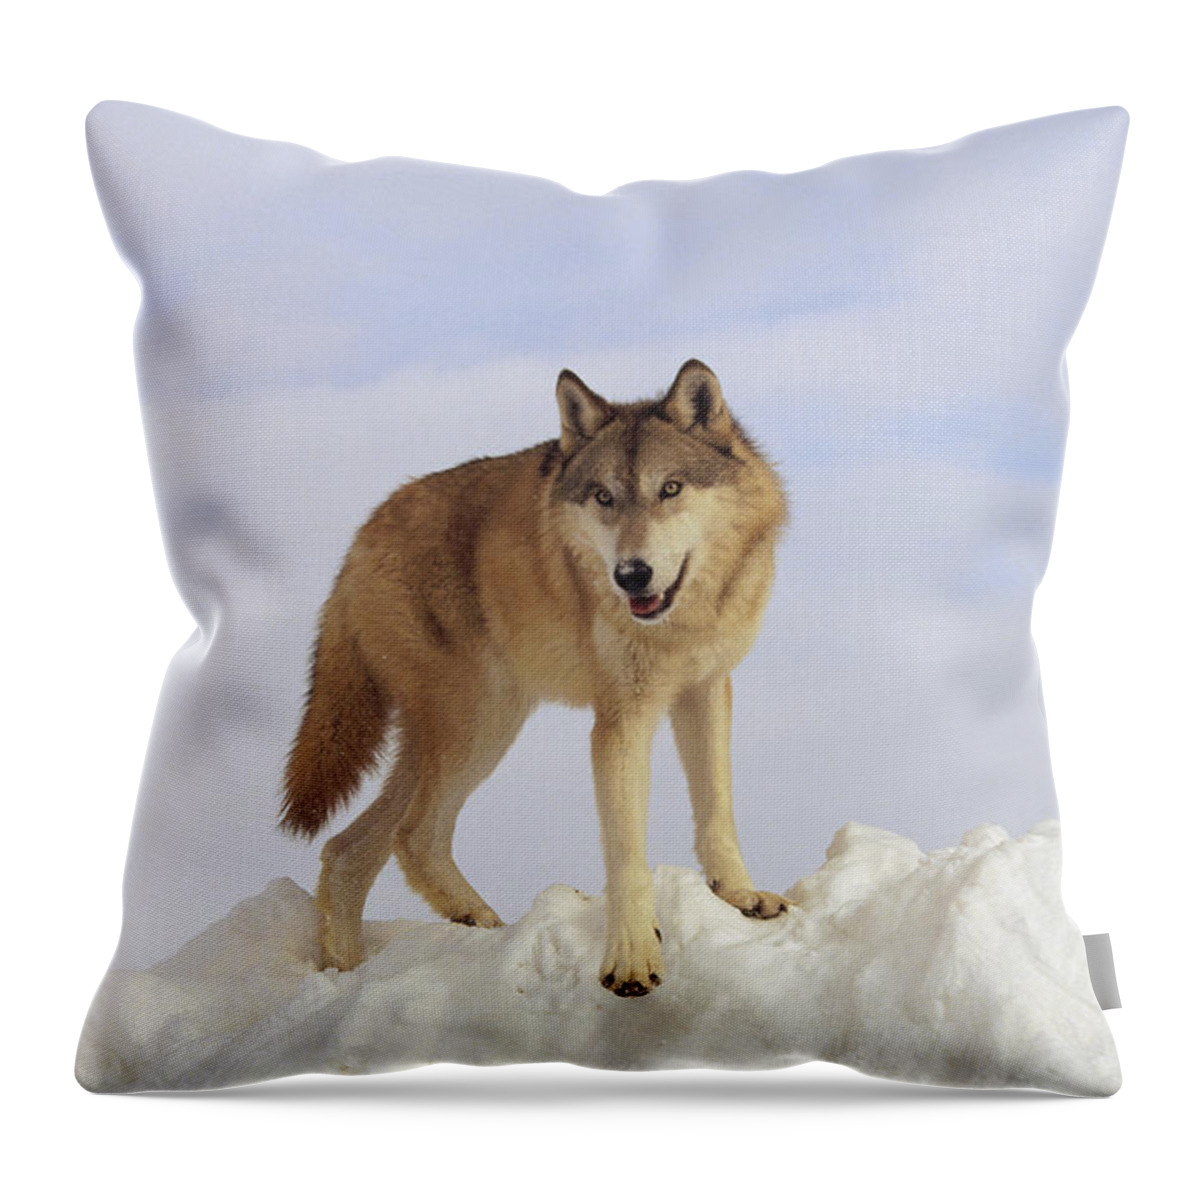 Feb0514 Throw Pillow featuring the photograph Timber Wolf Atop Snow Bank Montana by Tim Fitzharris